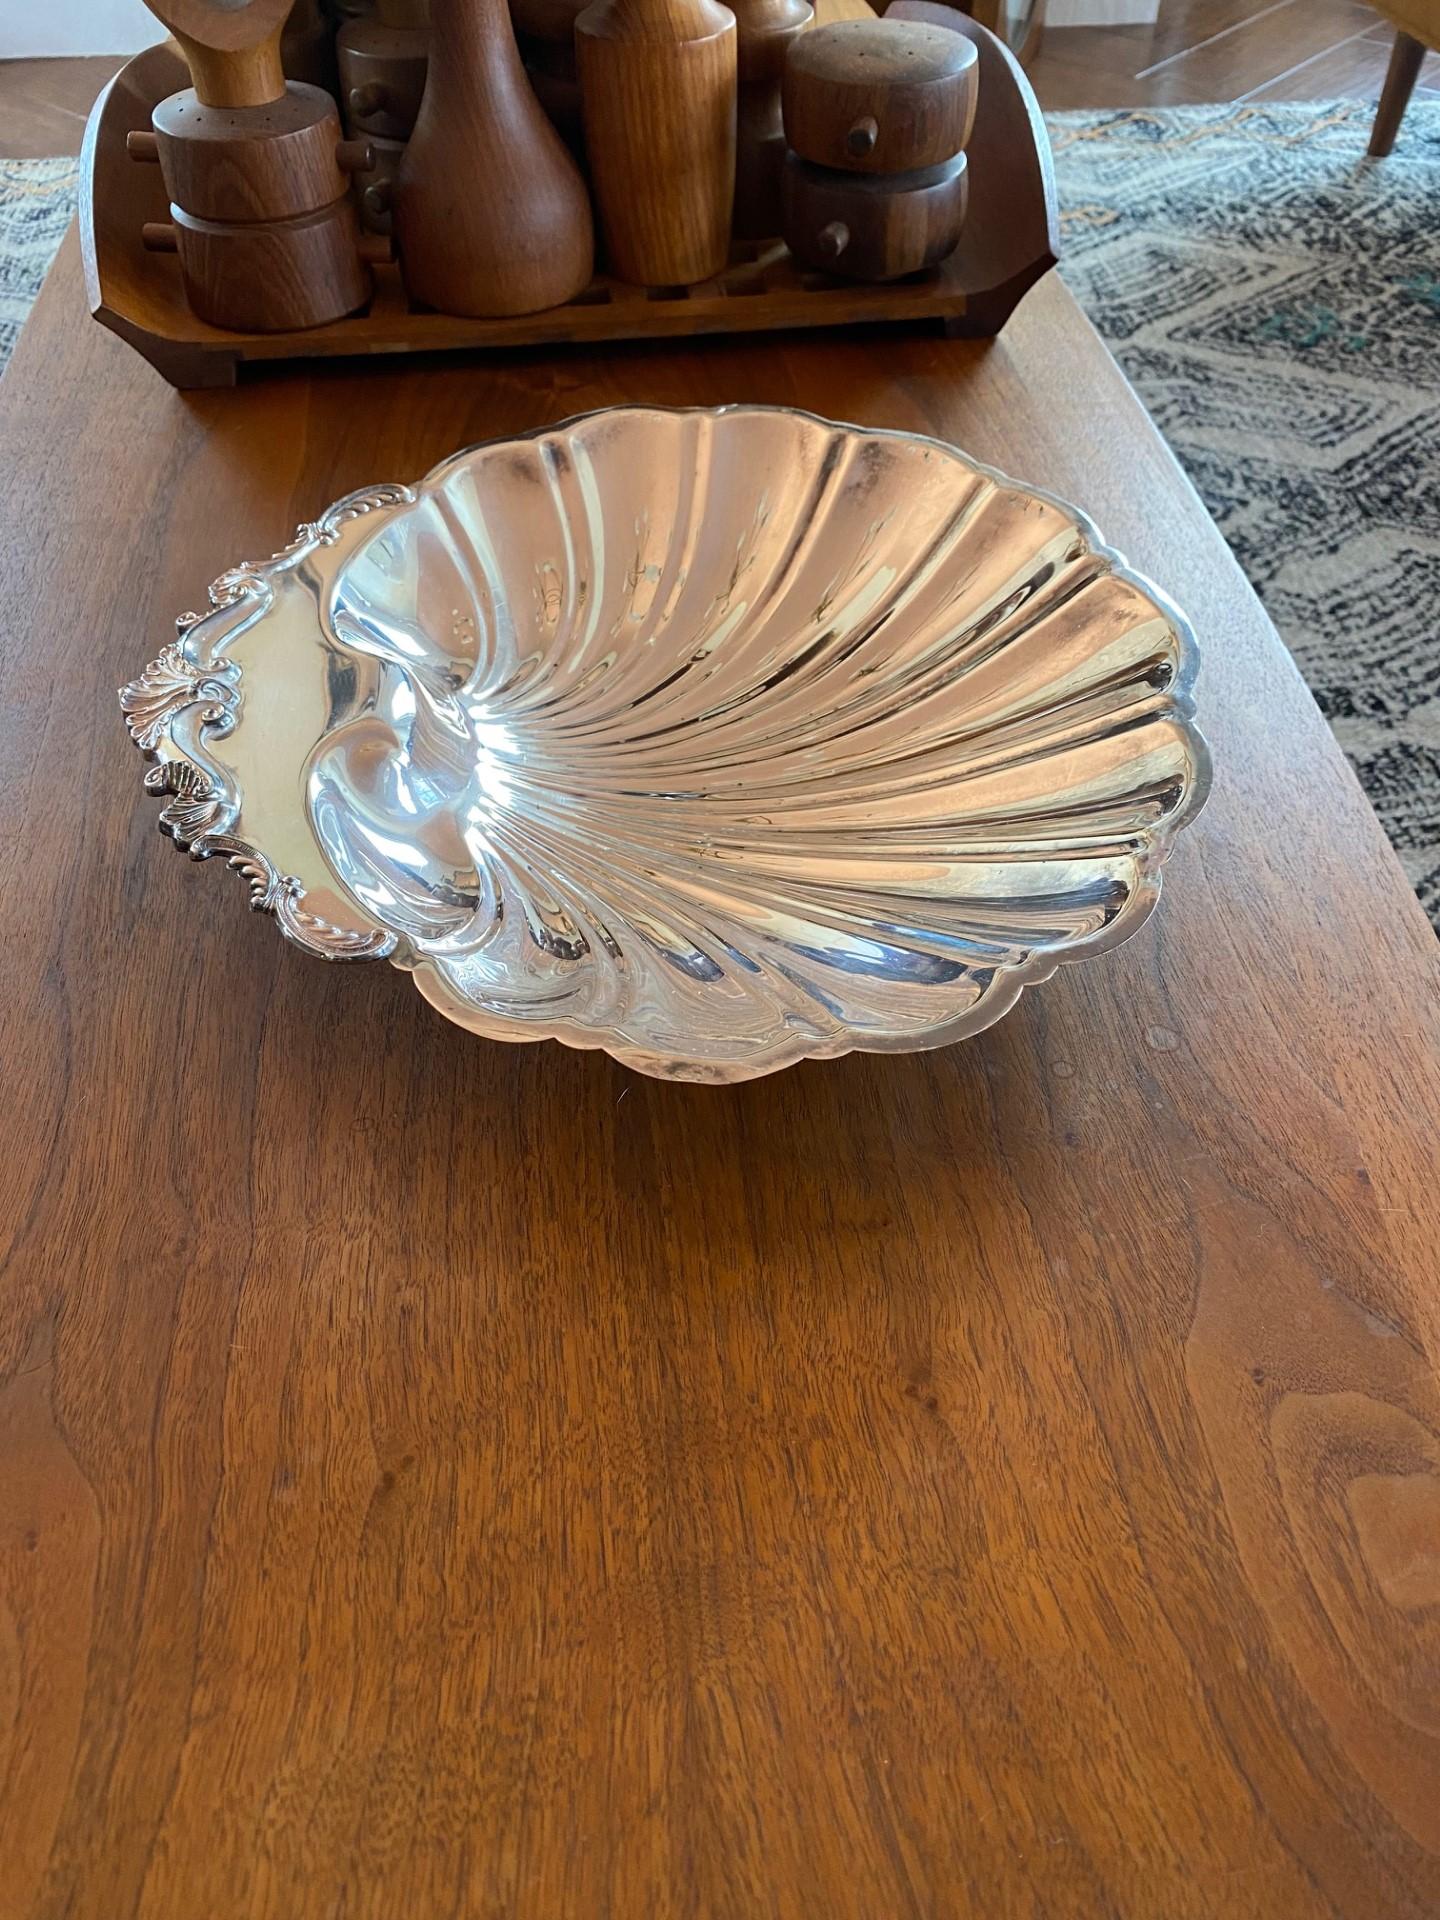 North American Antique FB Rogers Silver Co 1824 Silver Plated Footed Shell Dish